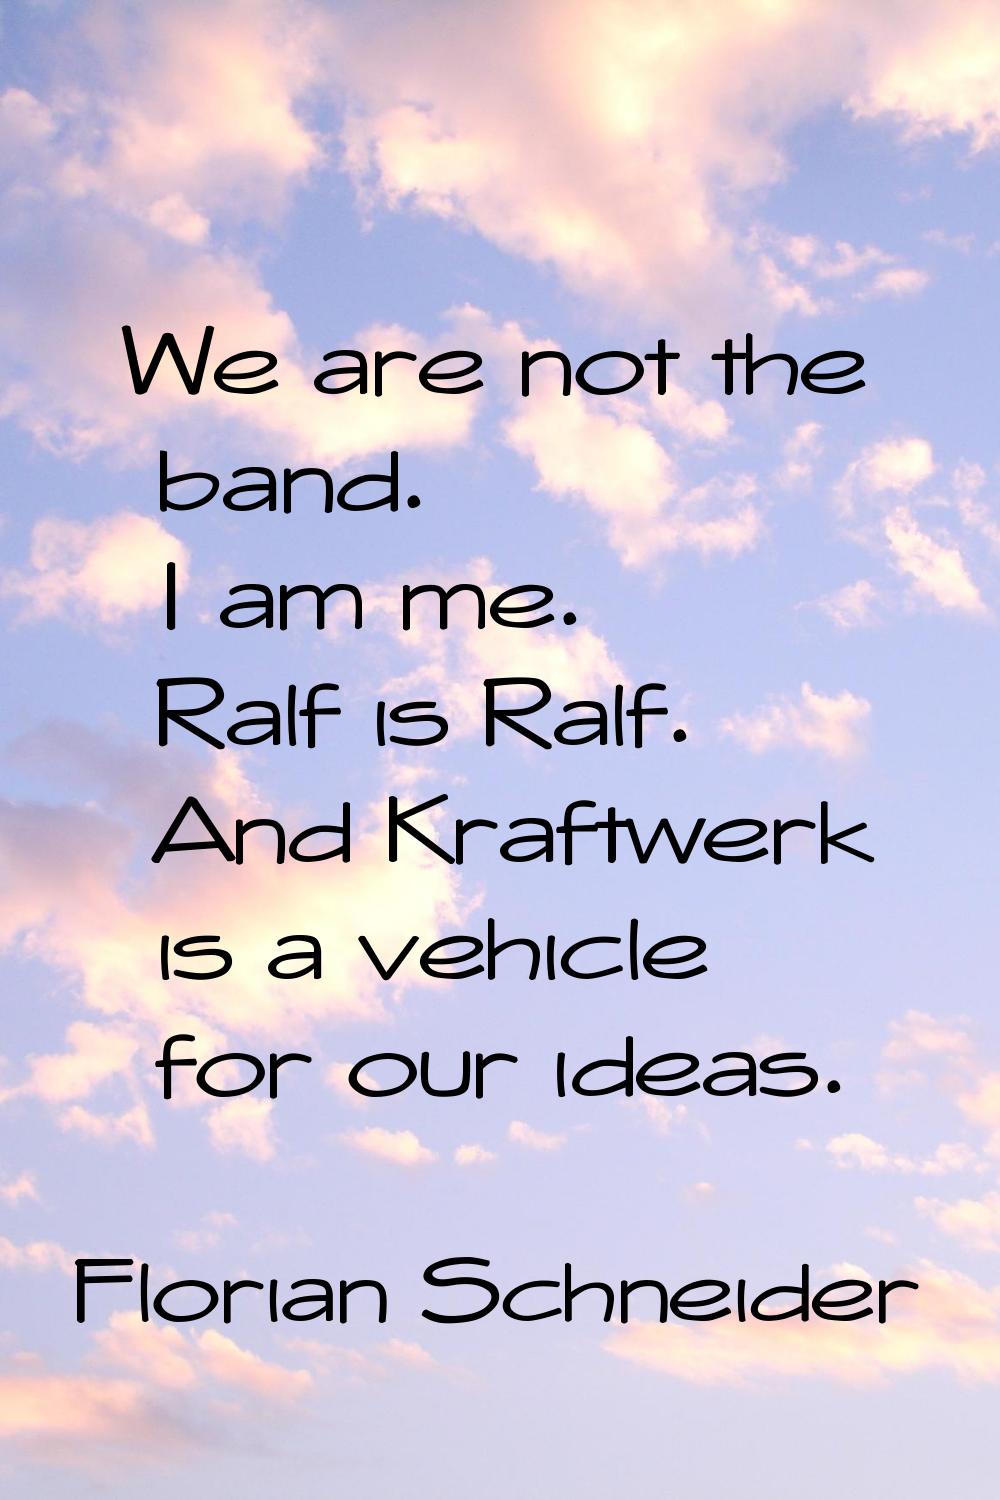 We are not the band. I am me. Ralf is Ralf. And Kraftwerk is a vehicle for our ideas.